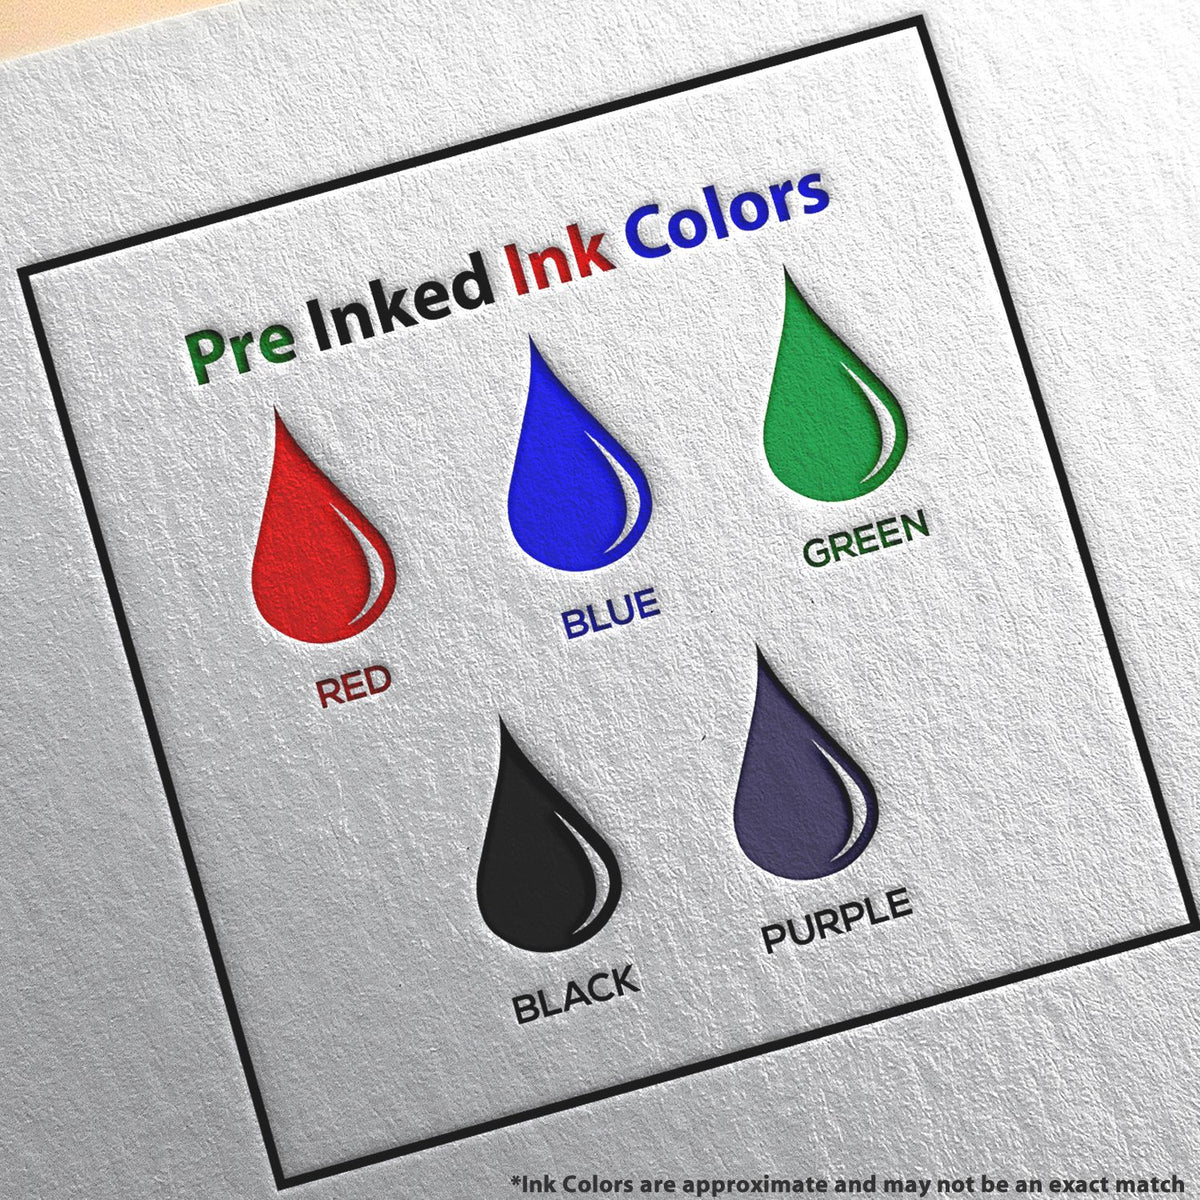 A picture showing the different ink colors or hues available for the Slim Pre-Inked Vermont Land Surveyor Seal Stamp product.